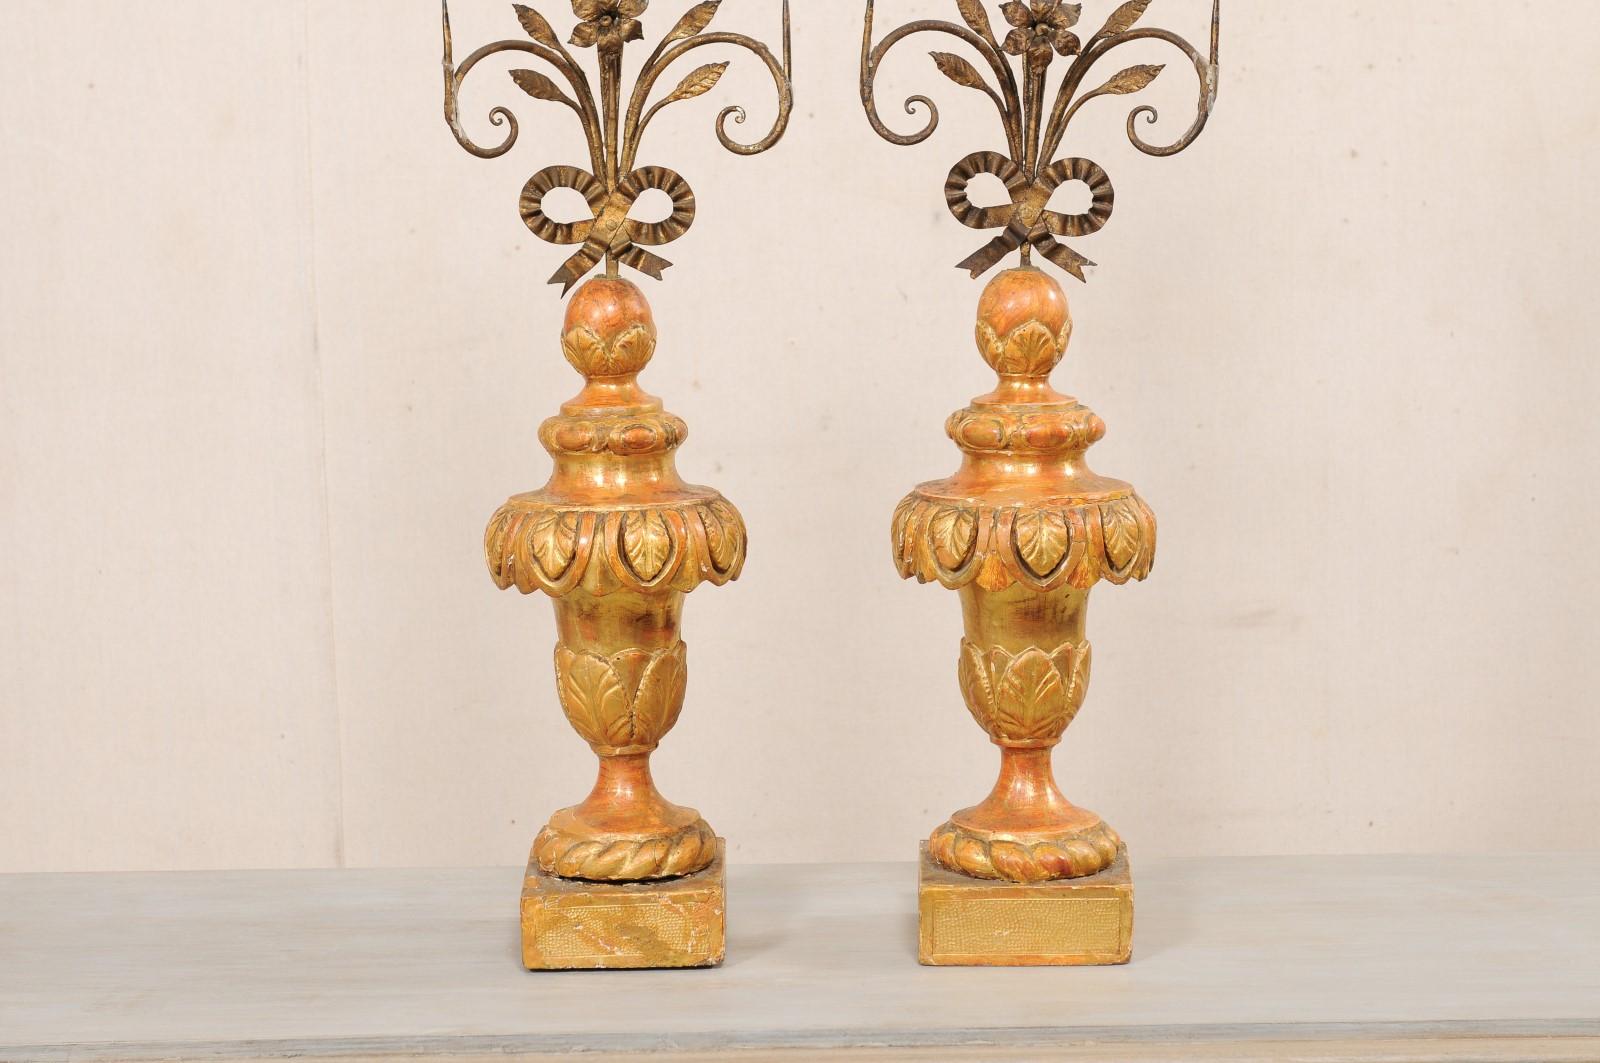 19th Century Early 19th C. Pair of Italian Iron Prickets on Wood Bases with Original Finish  For Sale